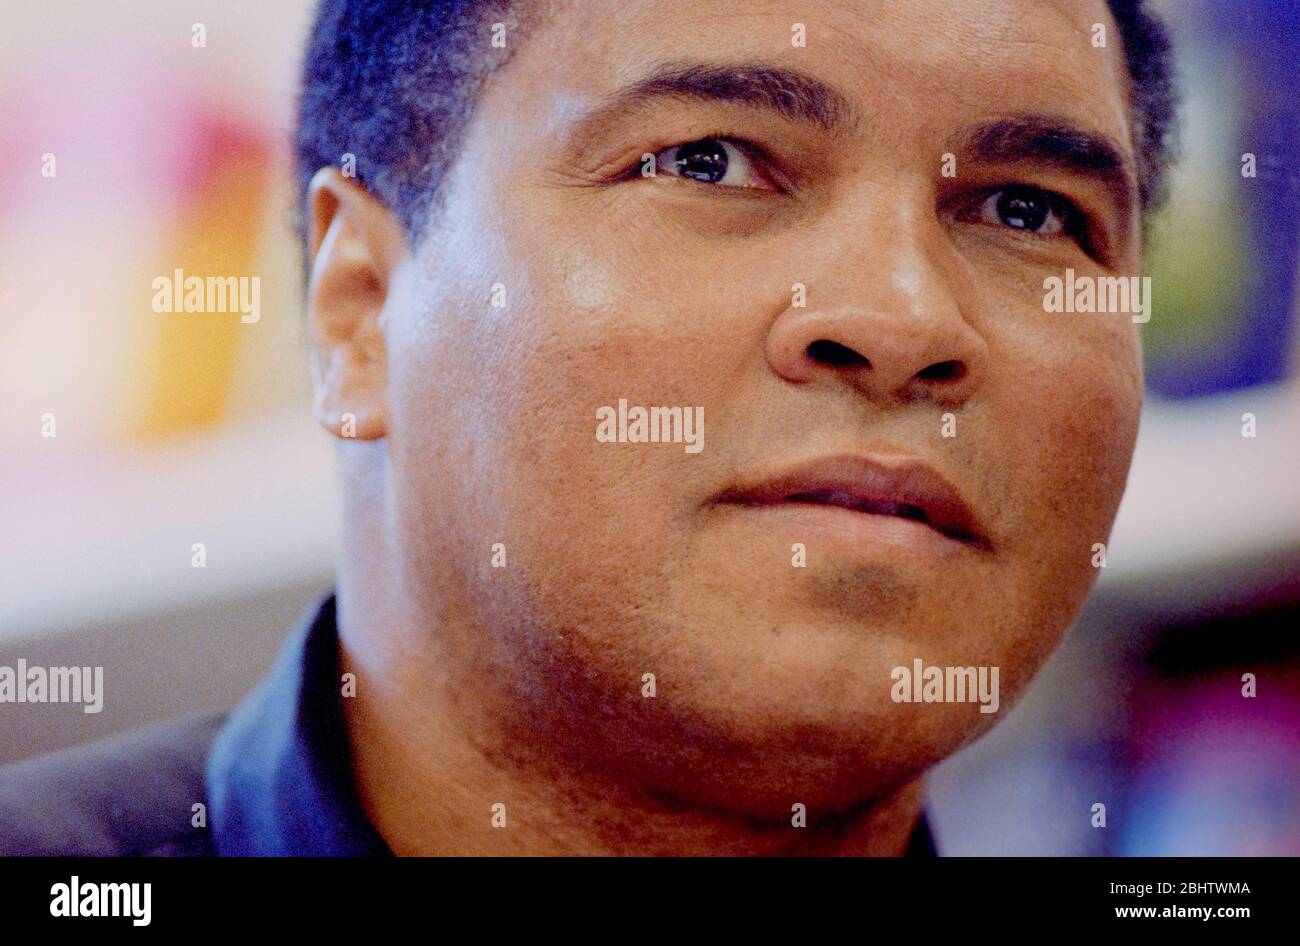 Muhammad Ali, former world heavyweight boxing champion, at a book signing in London in the mid 1990s. Stock Photo